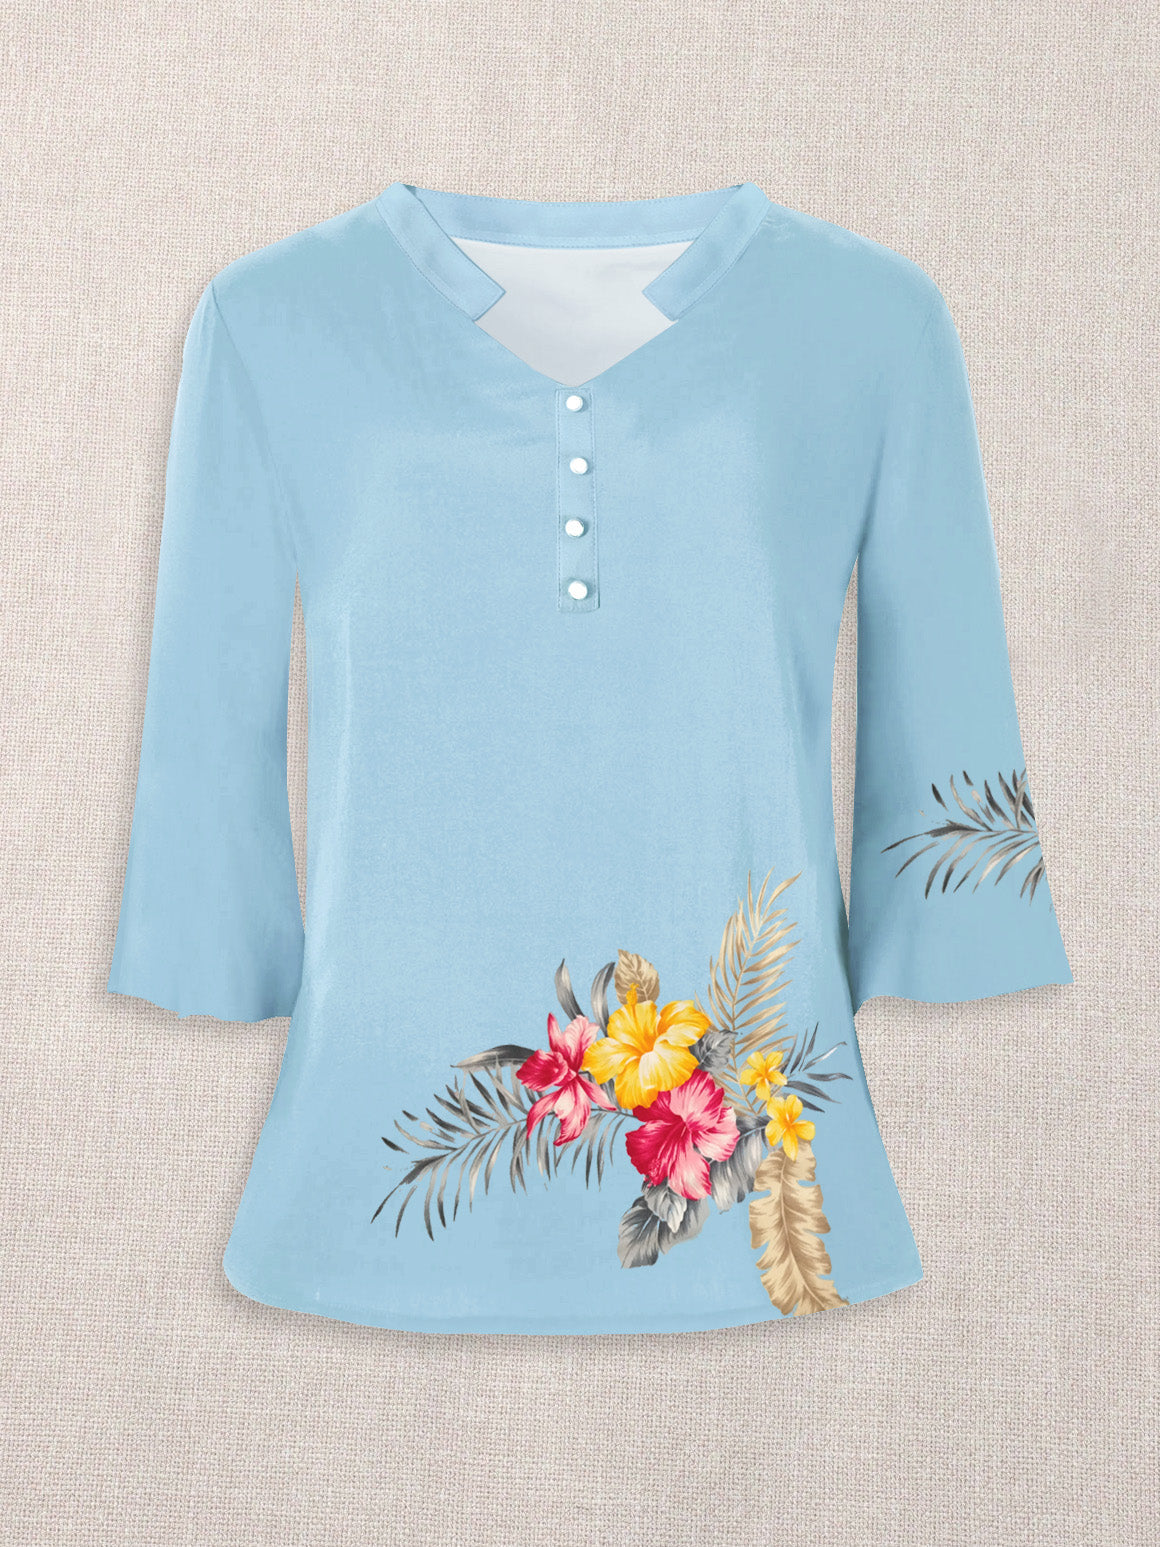 Louis Vicaci Butterfly Sleeve 4 Sided Lycra Ban Top For Ladies-Sky with Flower Print-BR719